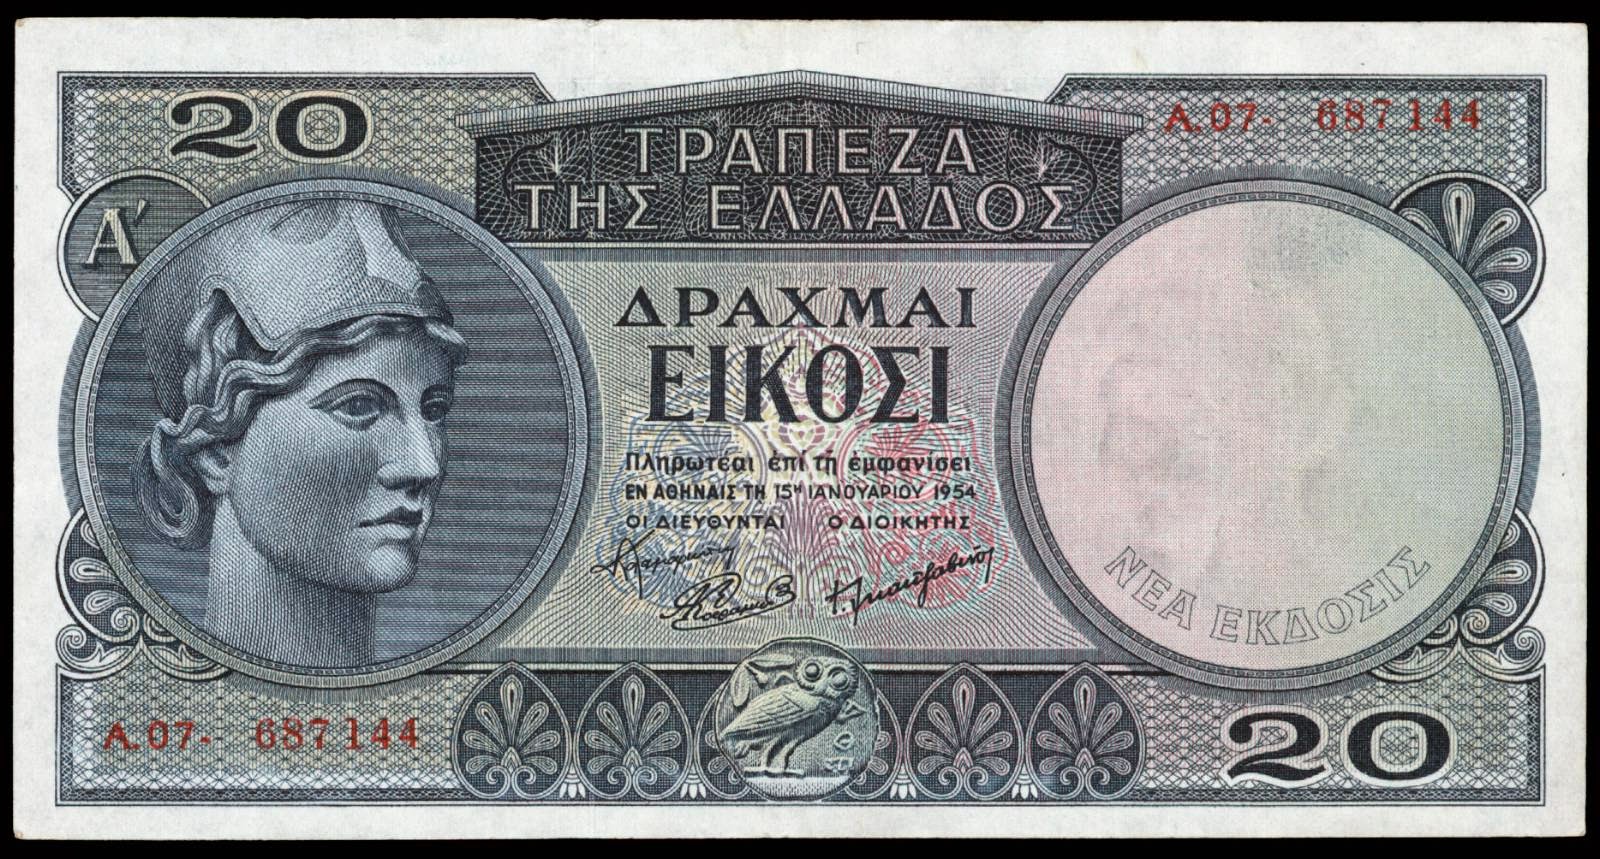 greece-20-greek-drachma-banknote-1954-world-banknotes-coins-pictures